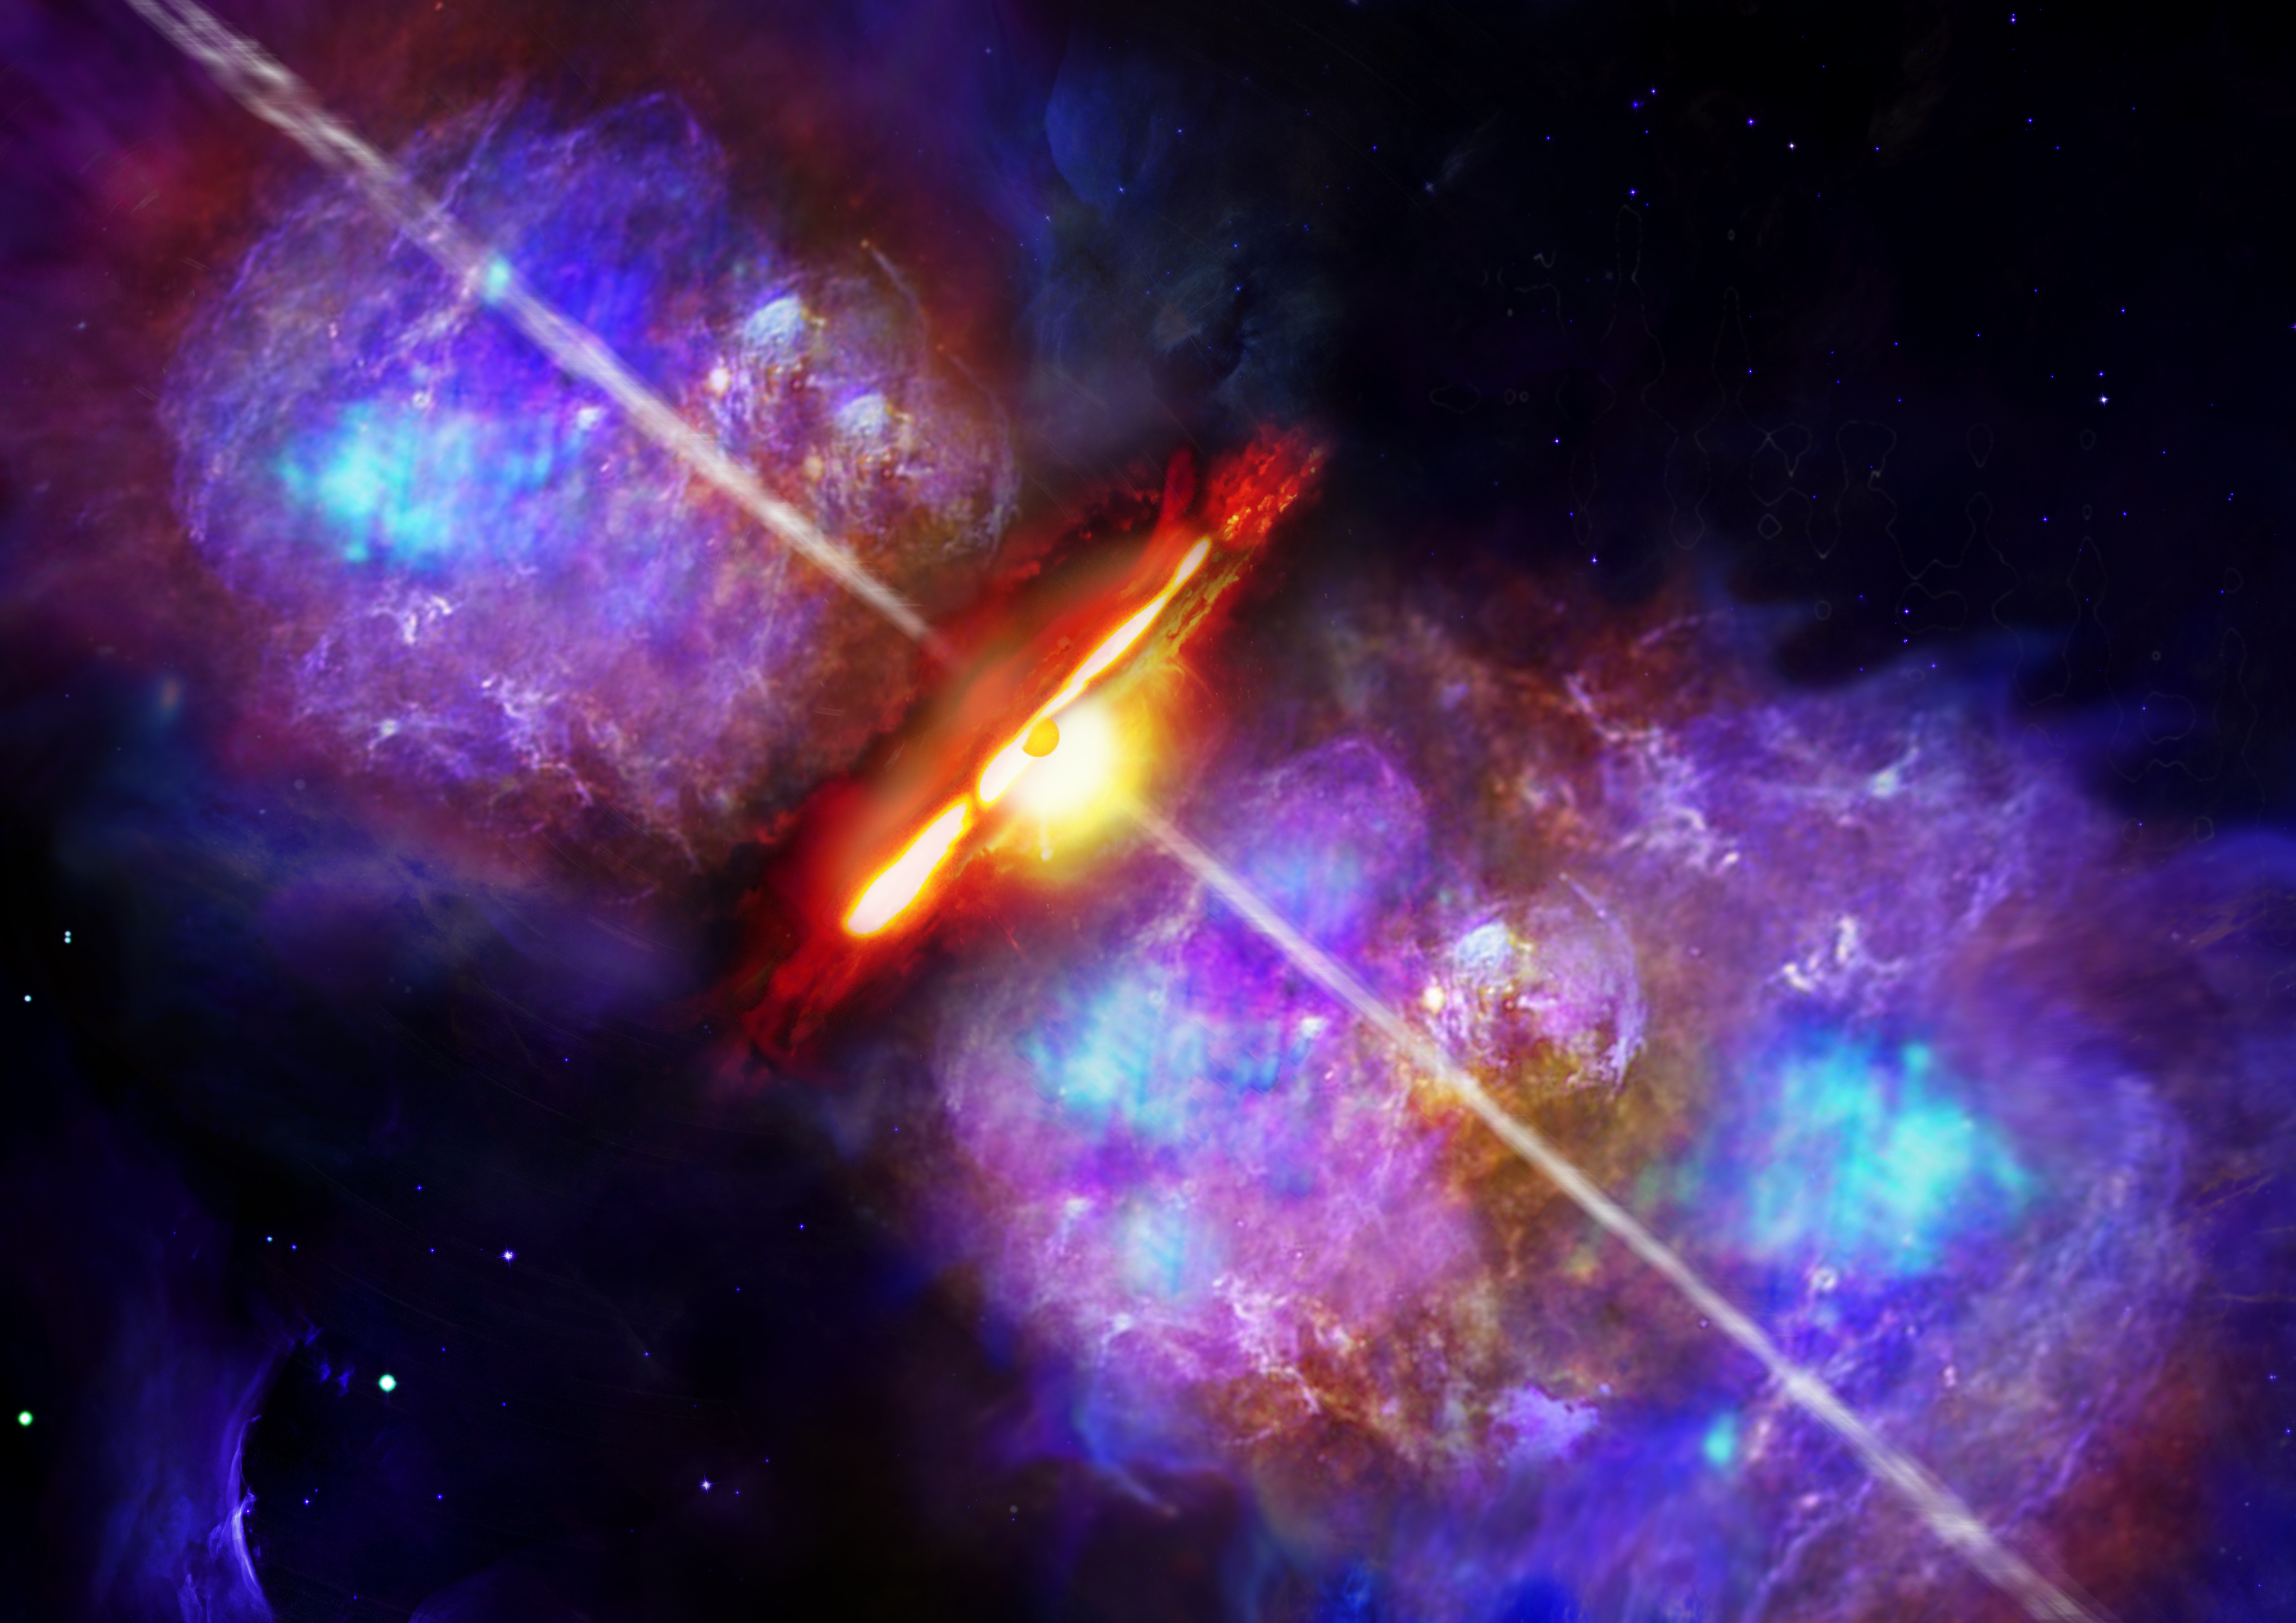 Massive 'Baby' Stars Are Born with Cosmic Fireworks